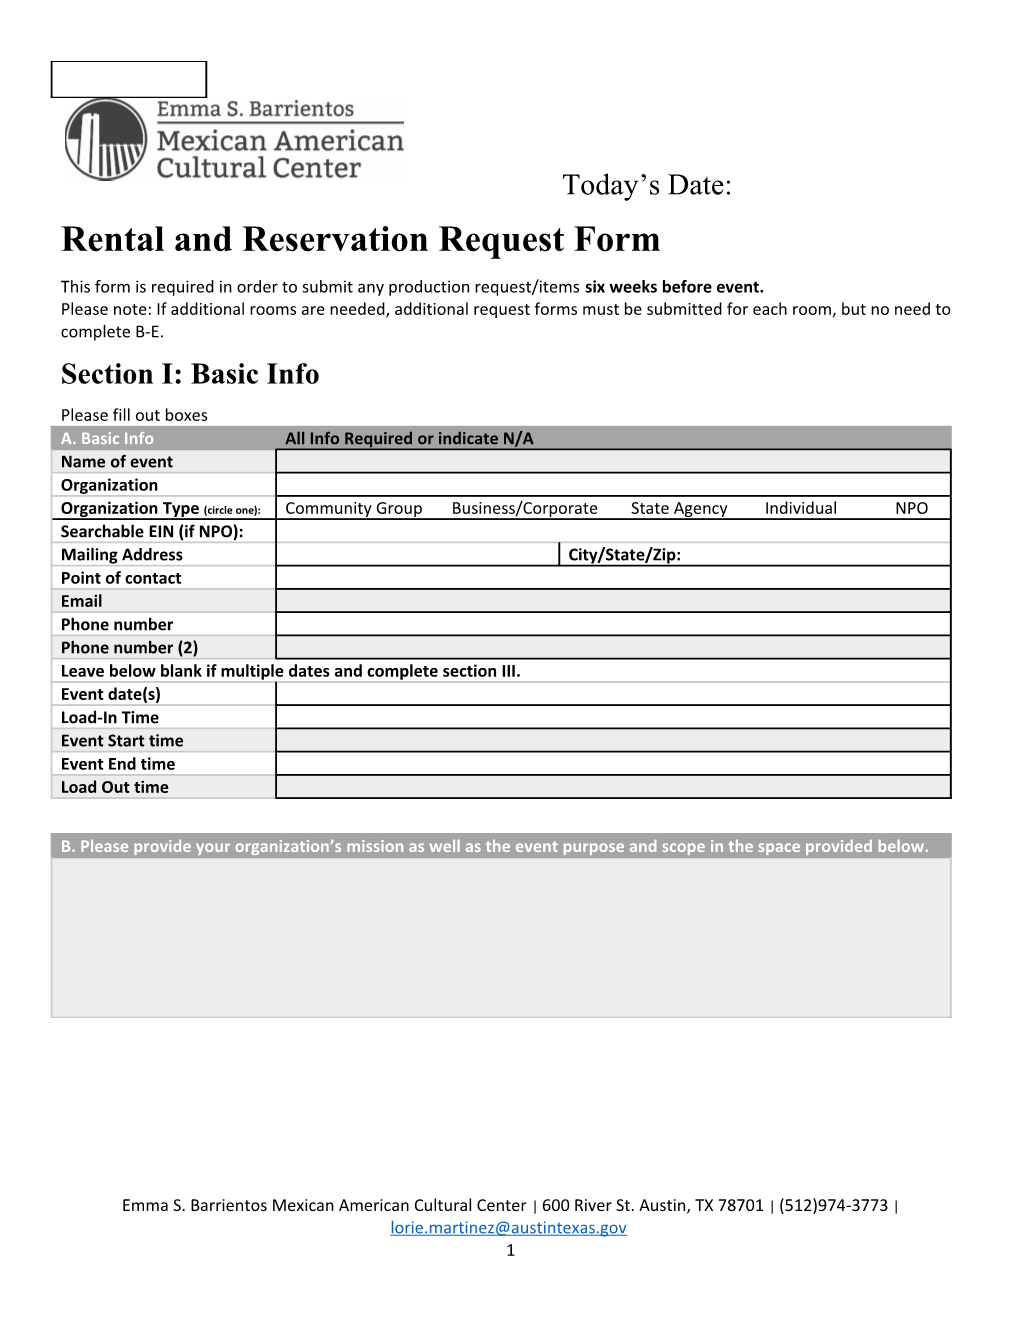 Rental and Reservation Request Form